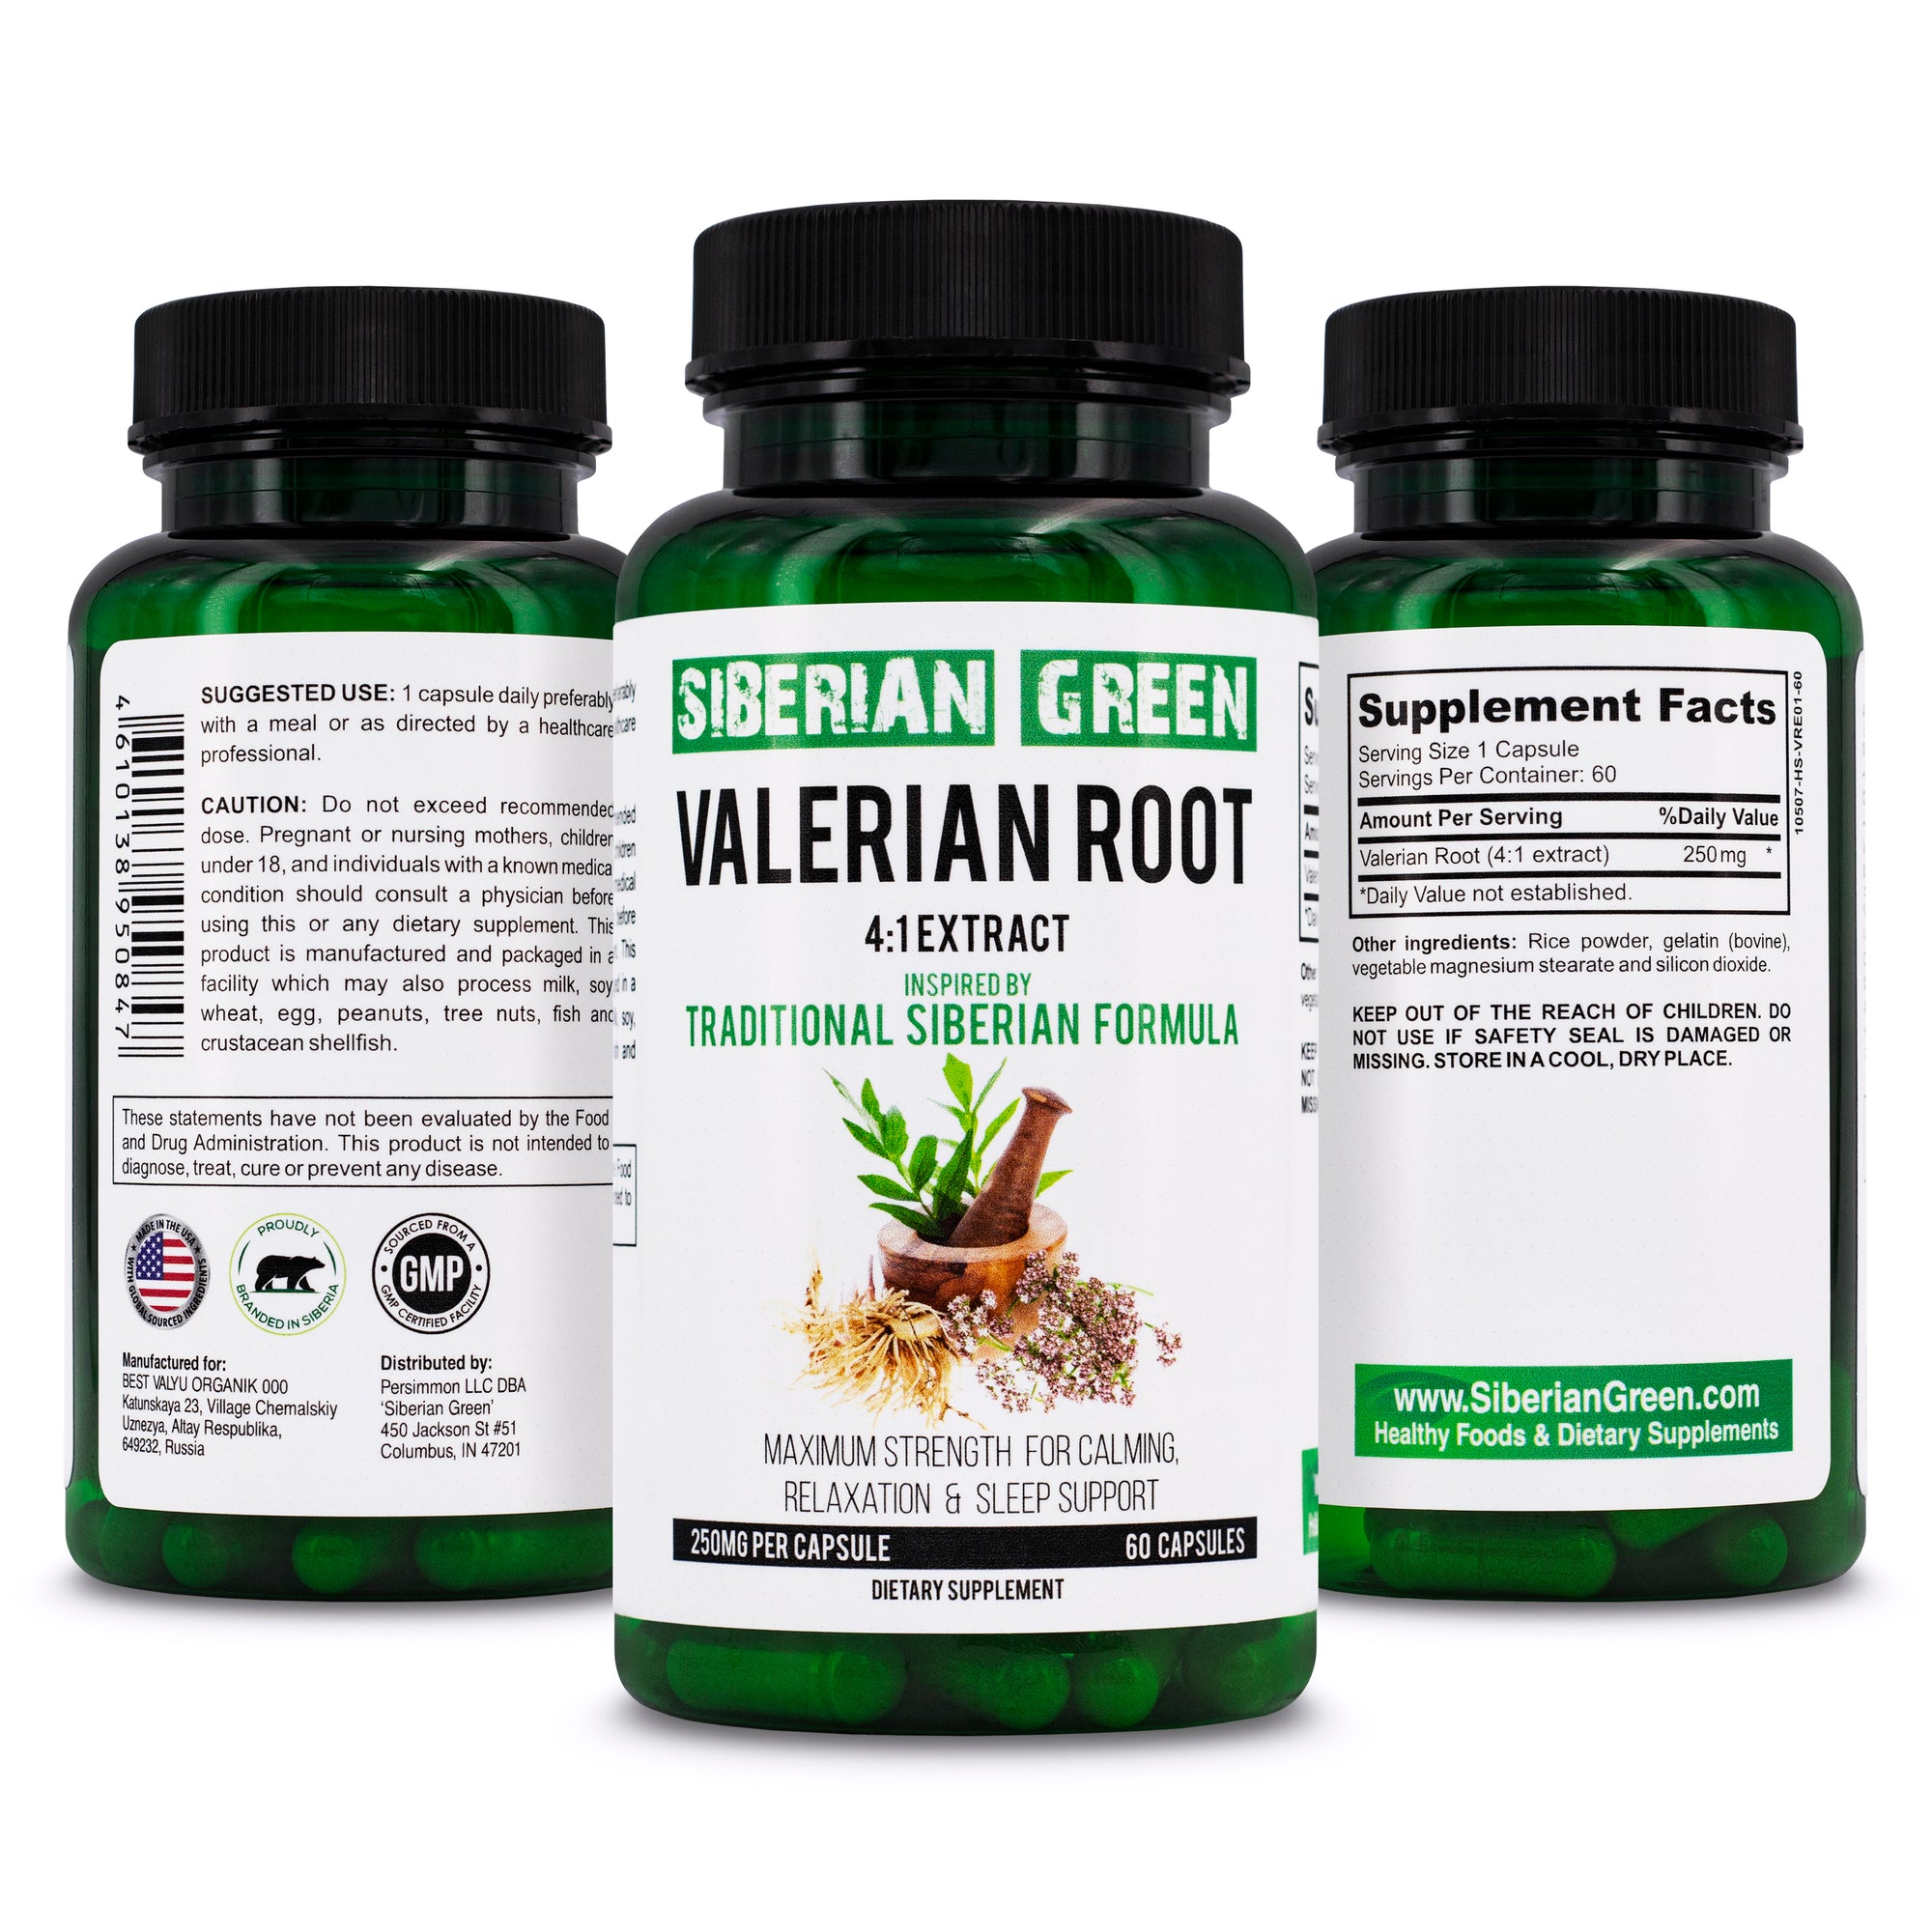 Extra Strength Valerian Root from Siberia. What do we know about it?